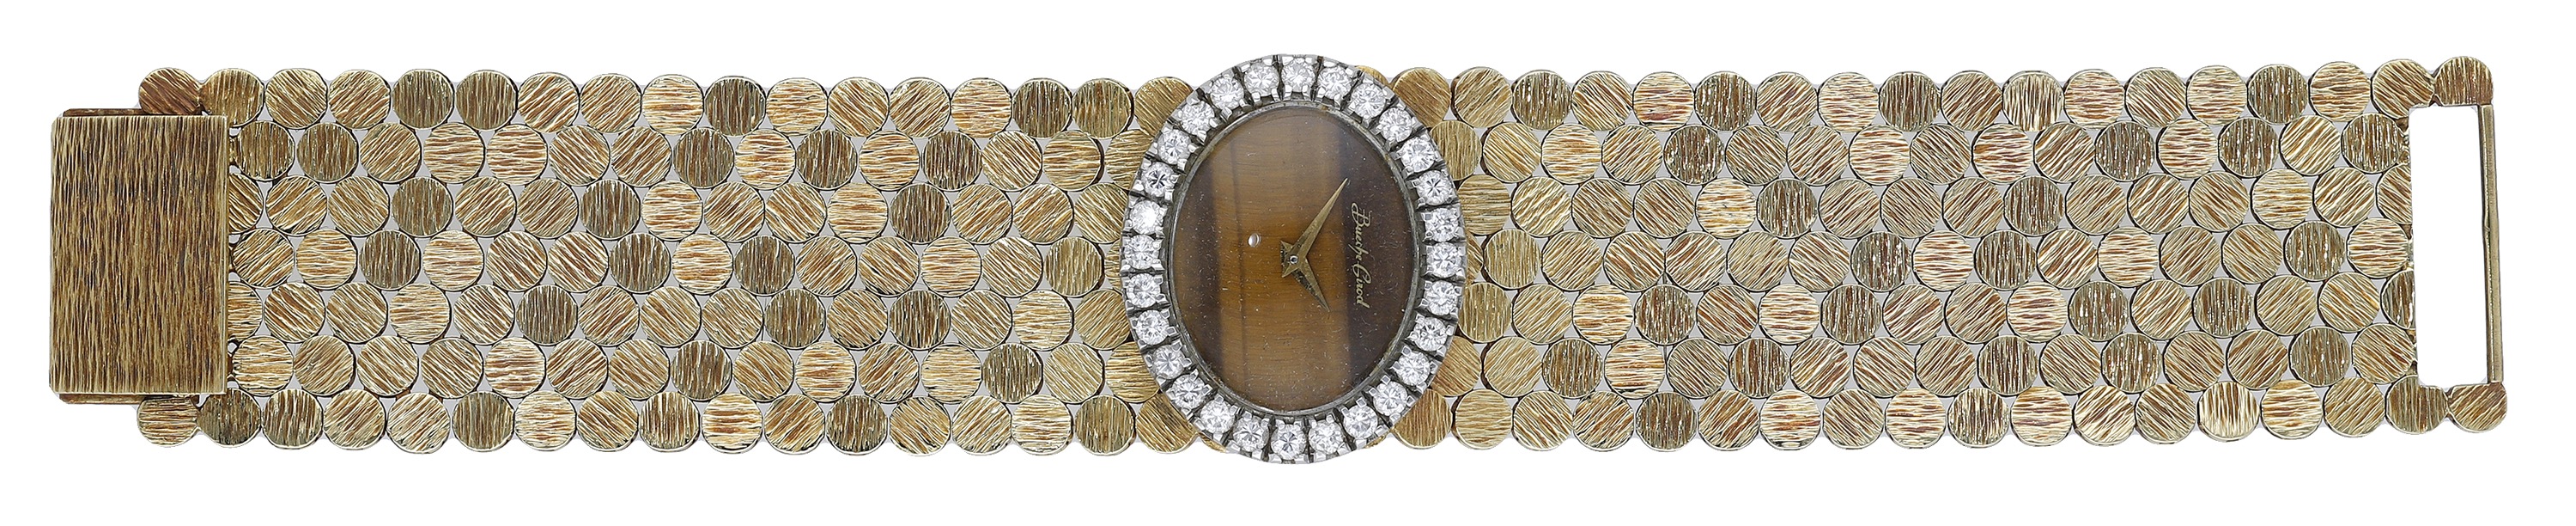 Bueche Girod. A gold and diamond-set bracelet watch with tiger's eye dial, circa 1971. Move... - Image 3 of 6